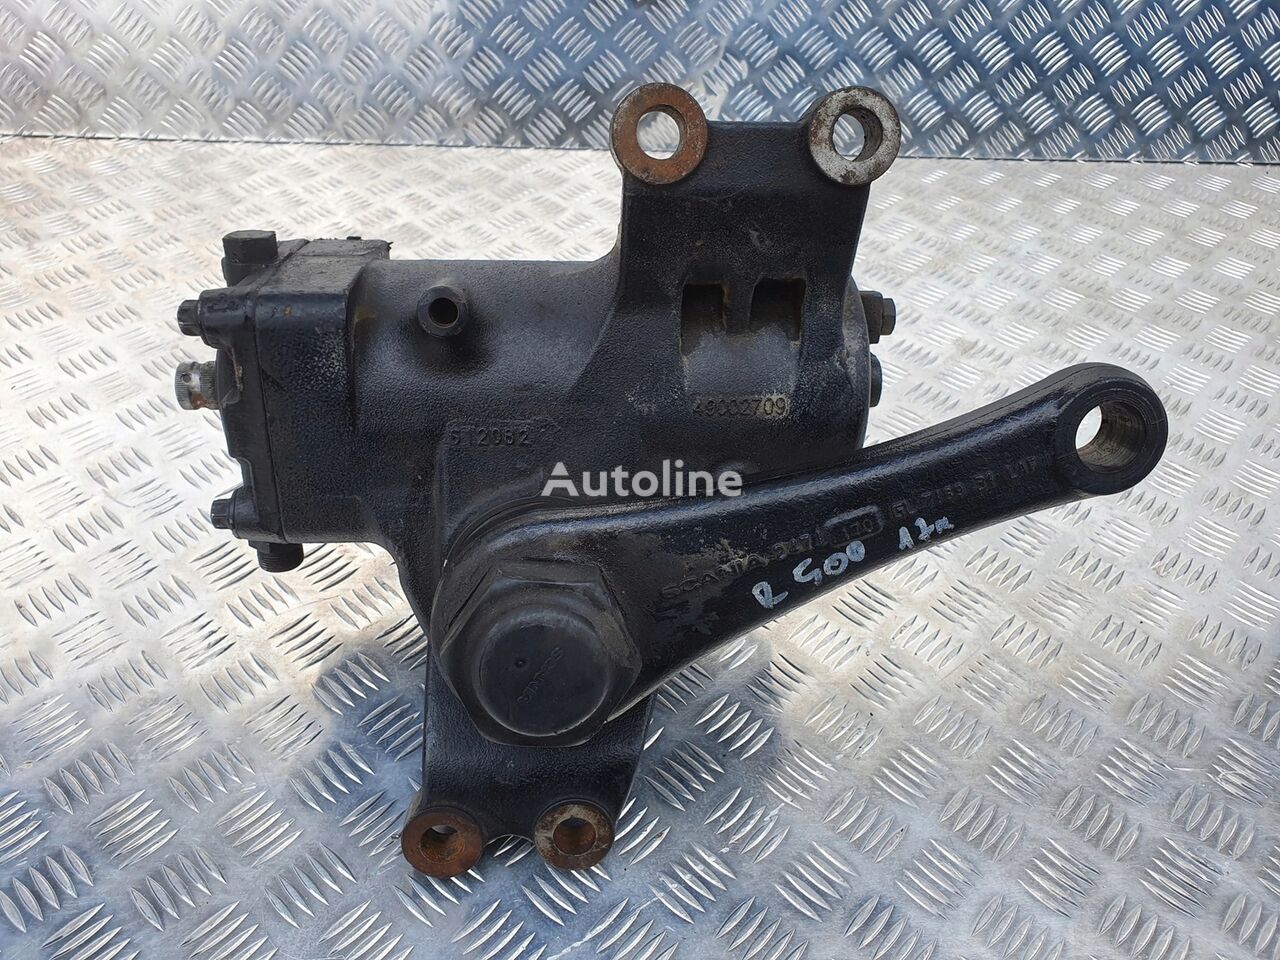 Scania TRW 2085169 steering gear for Scania NTG EURO 6 truck tractor